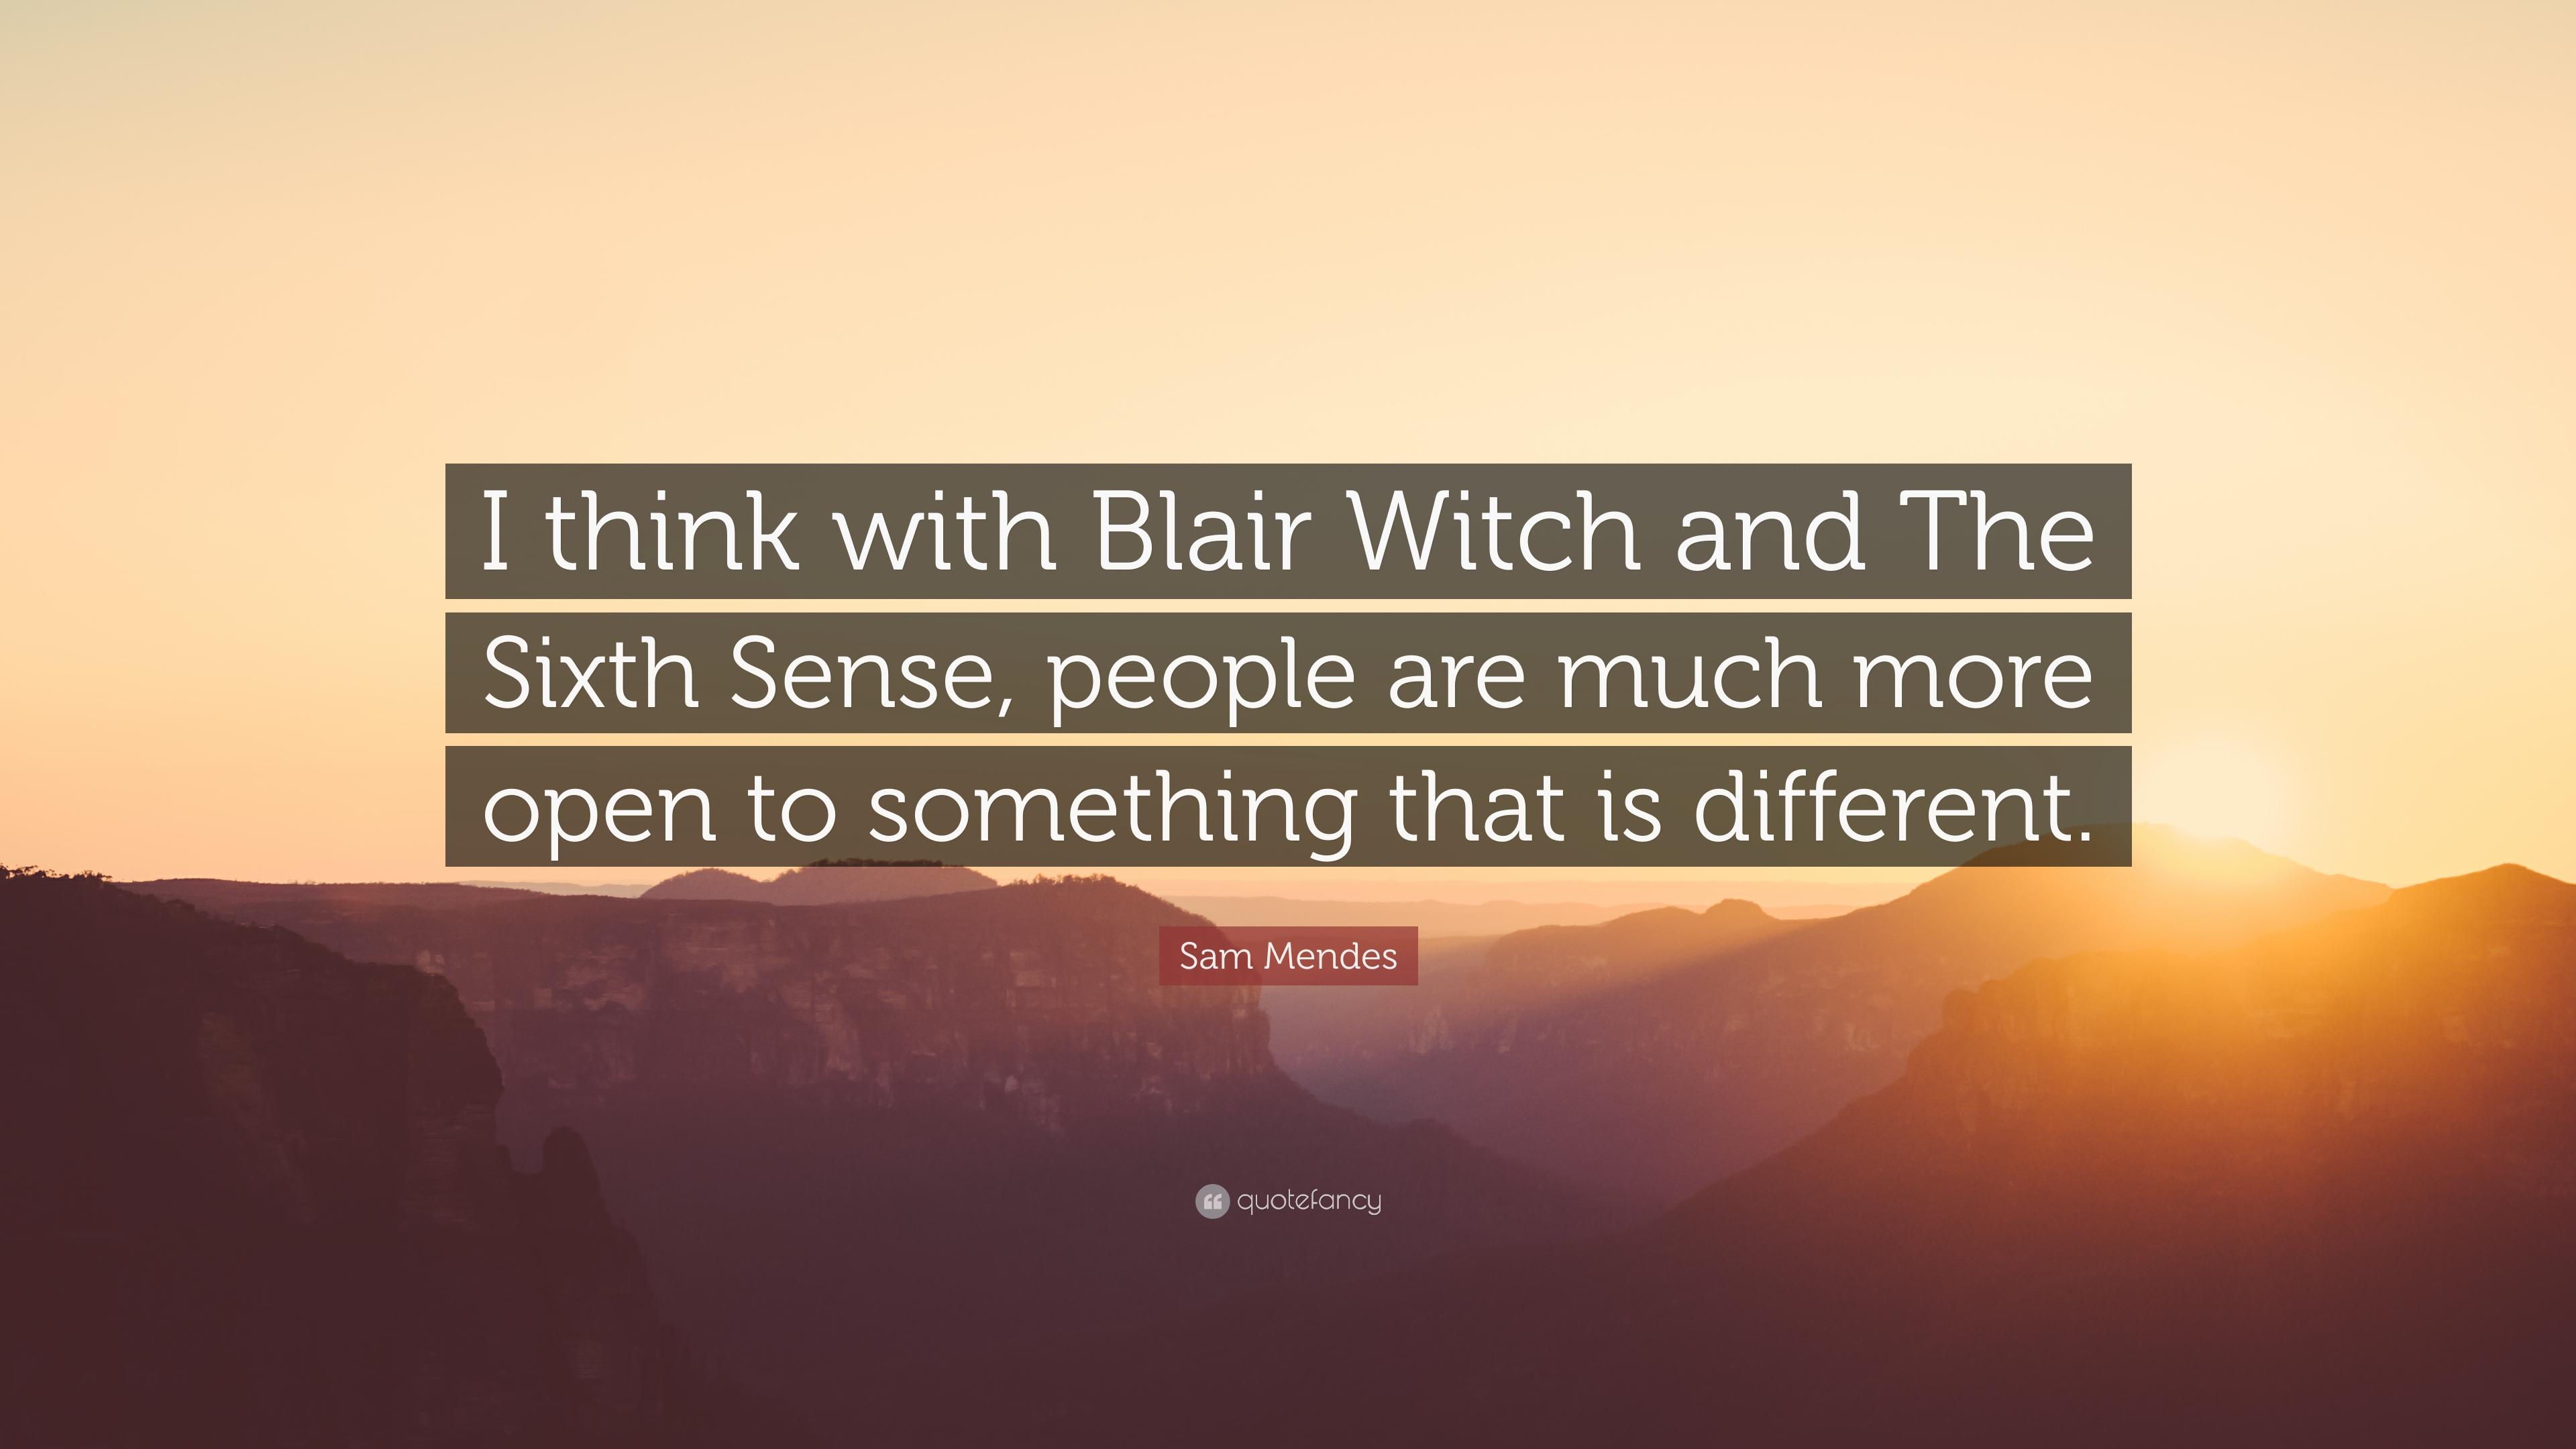 Sam Mendes Quote: “I think with Blair Witch and The Sixth Sense